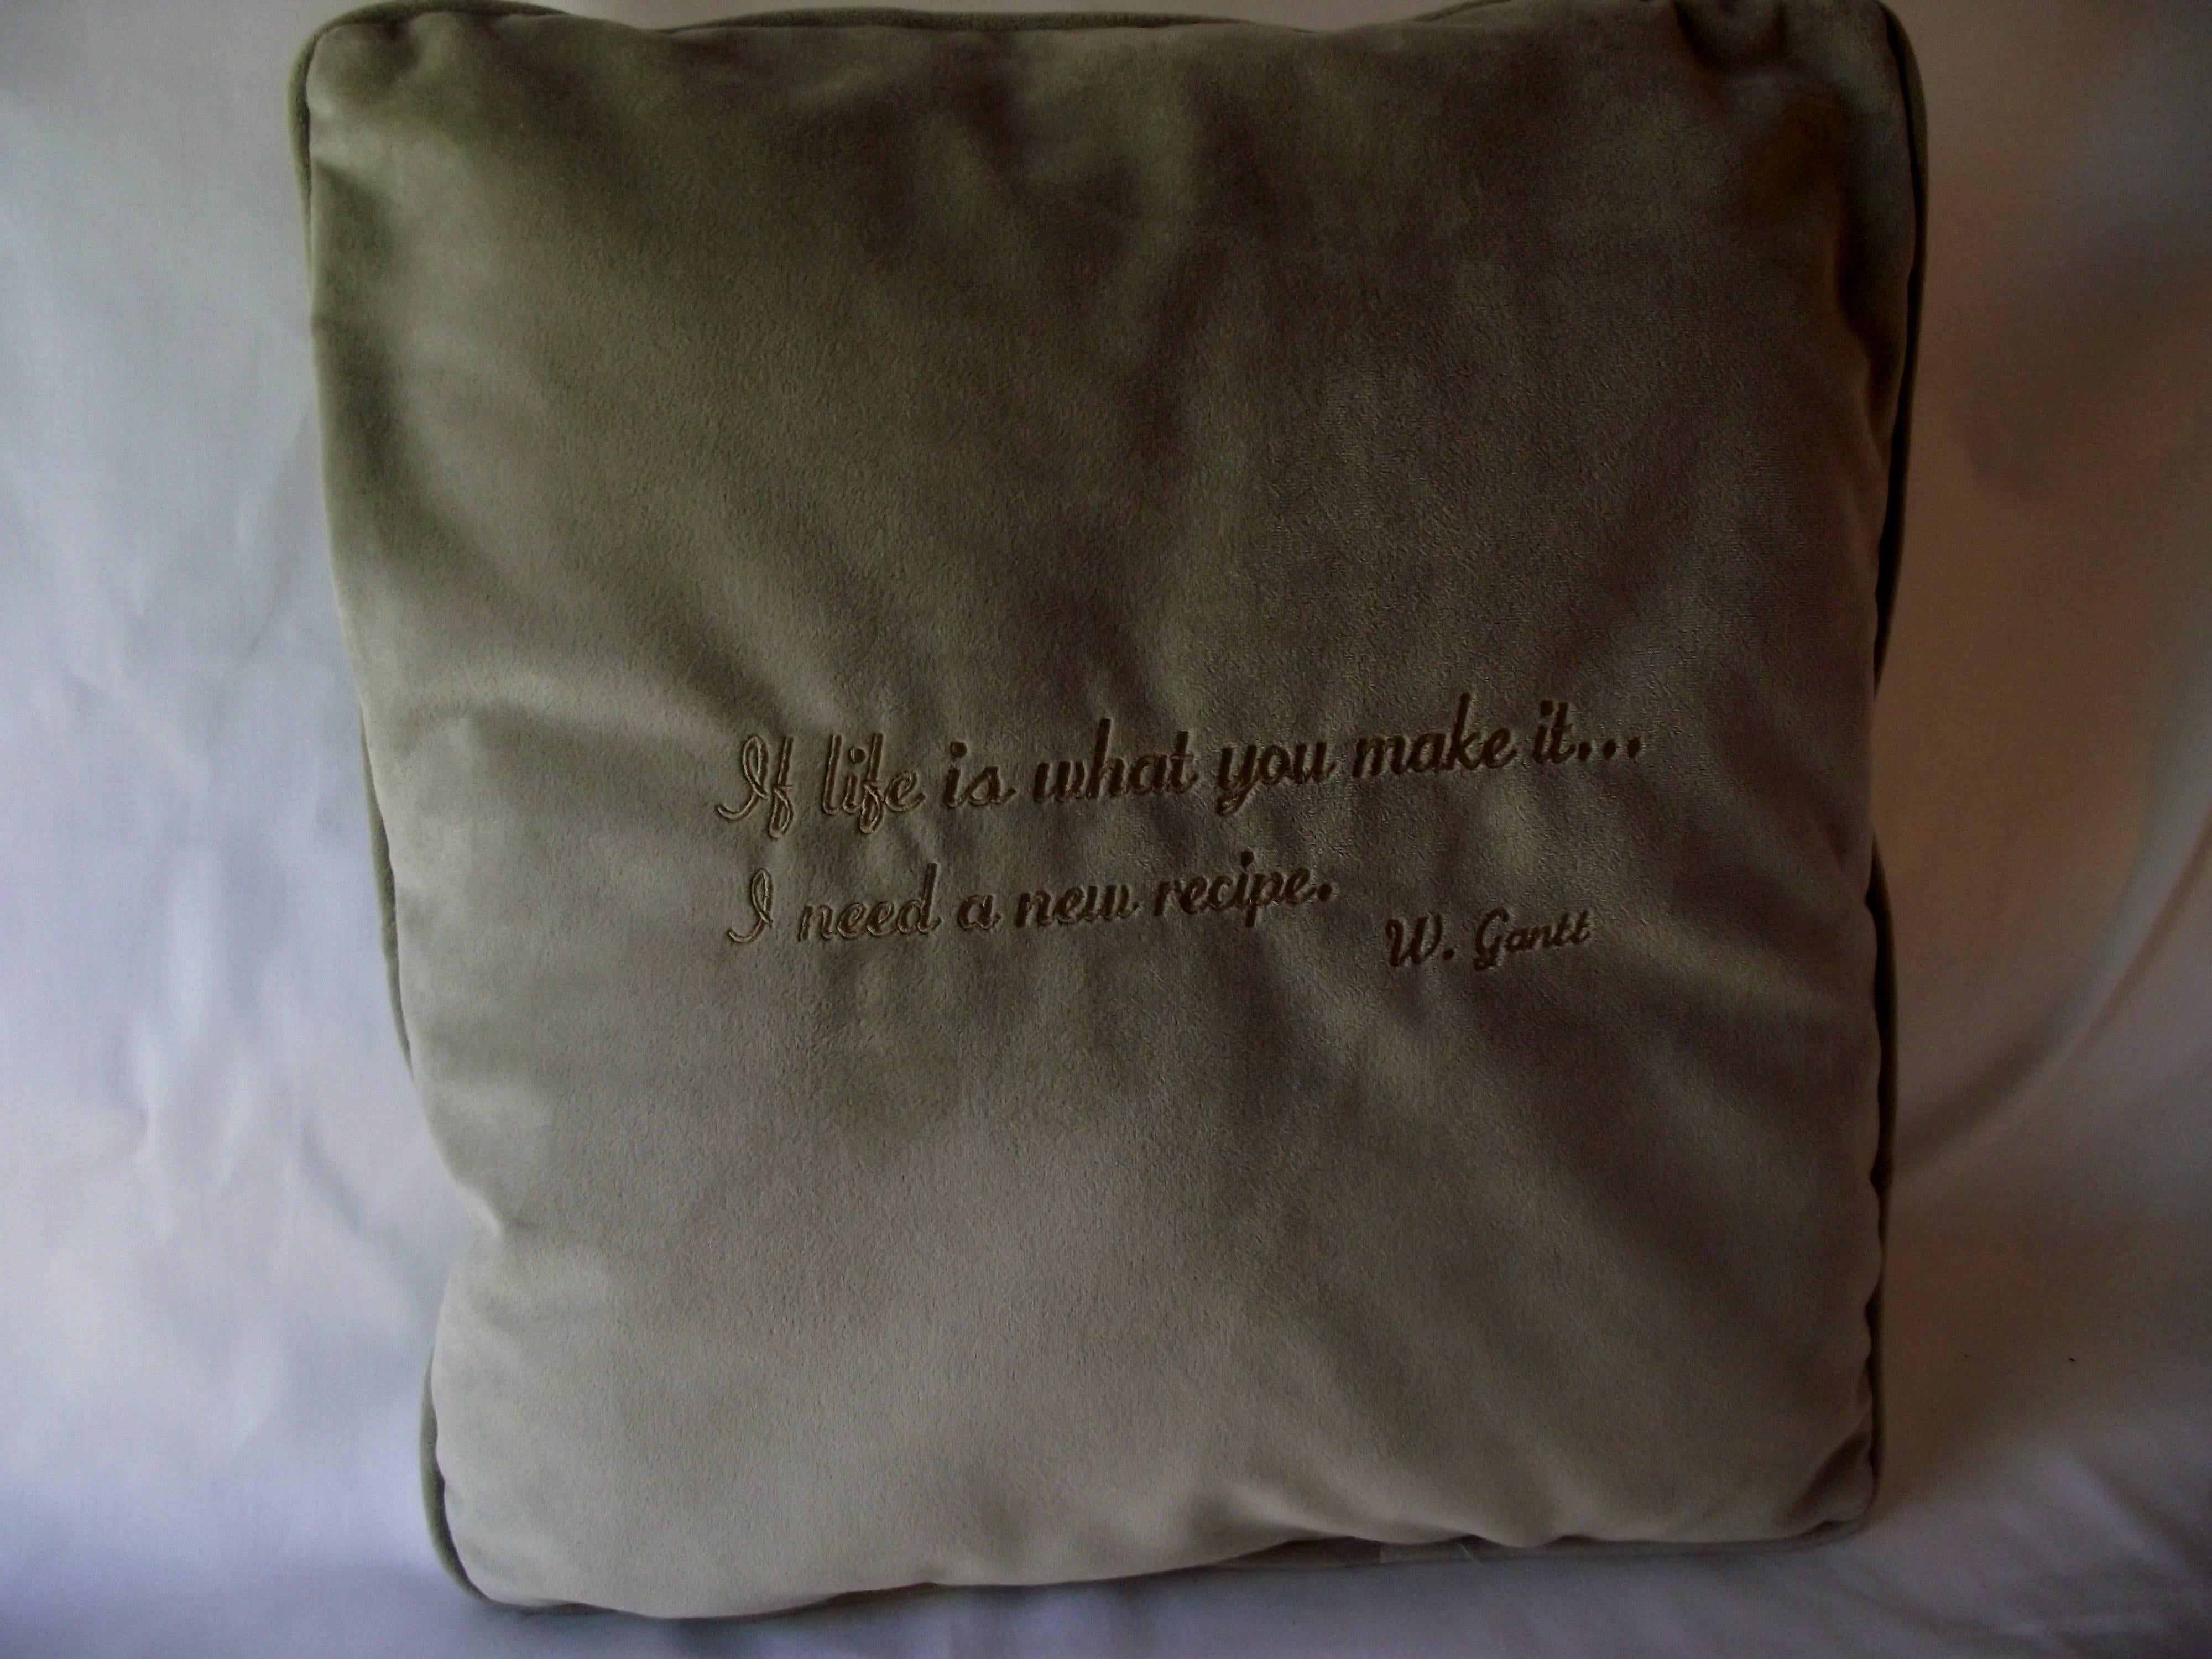 Statement Throw Pillows, Unusual Pillows, Philosophy Pillows, gifts for men In Excellent Condition For Sale In Harrisburg, PA